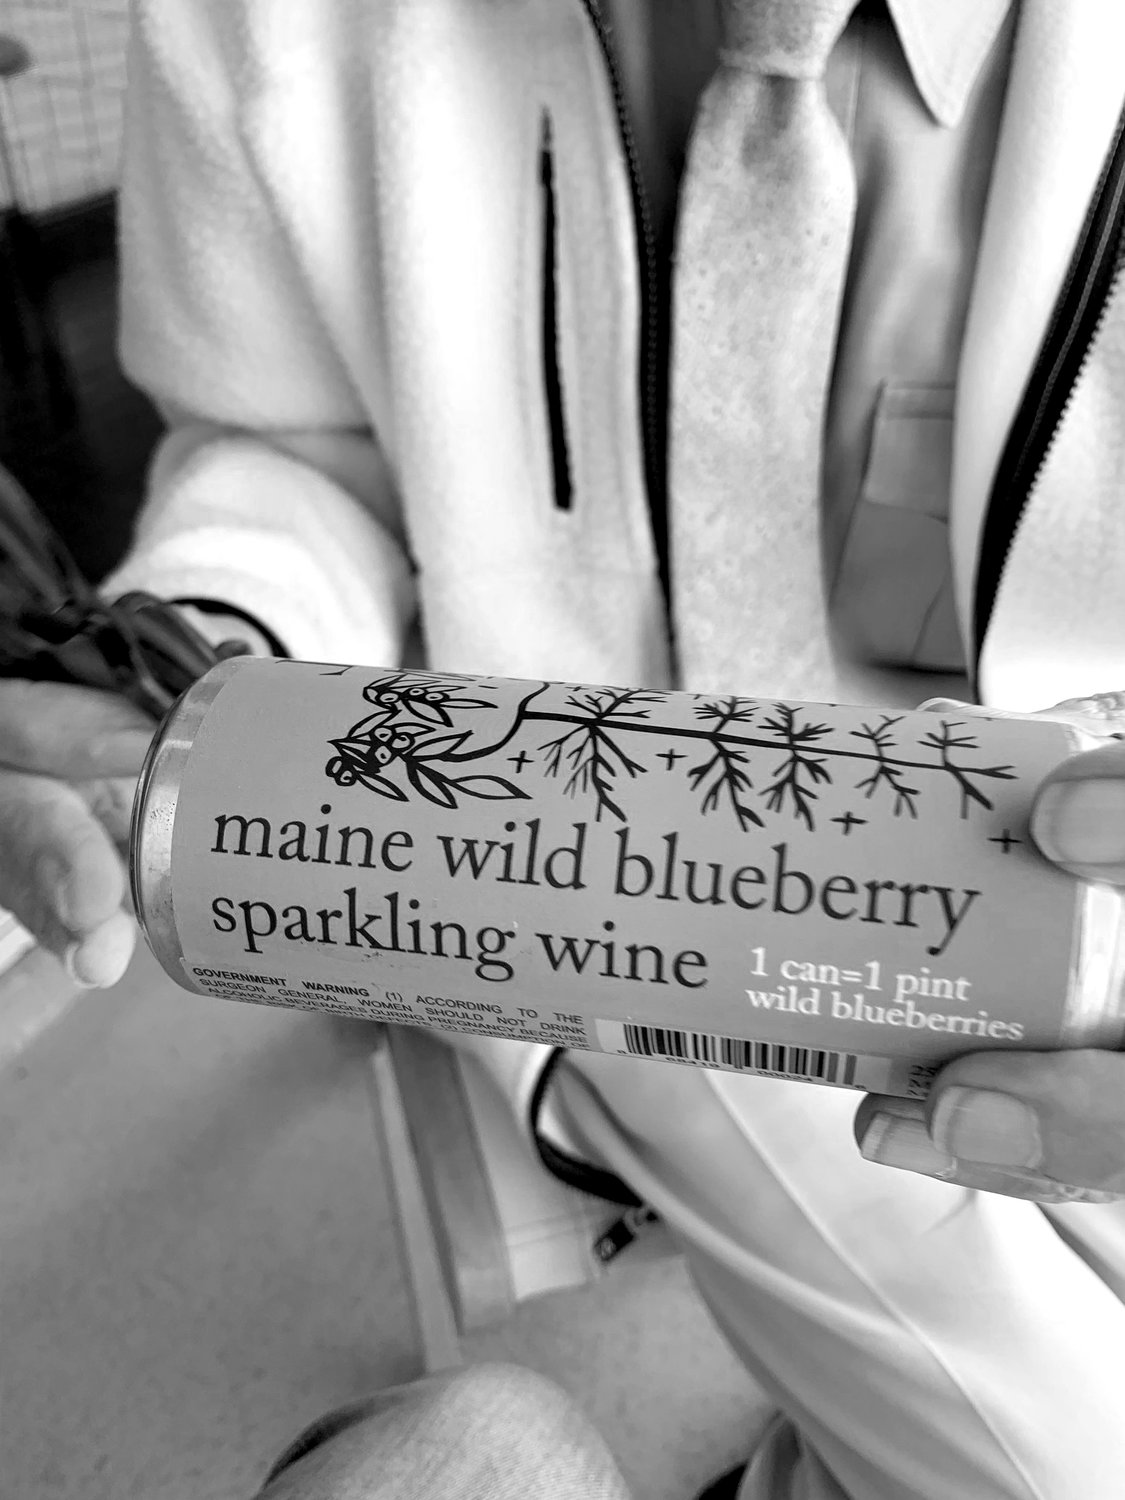 The can of blueberry wine.